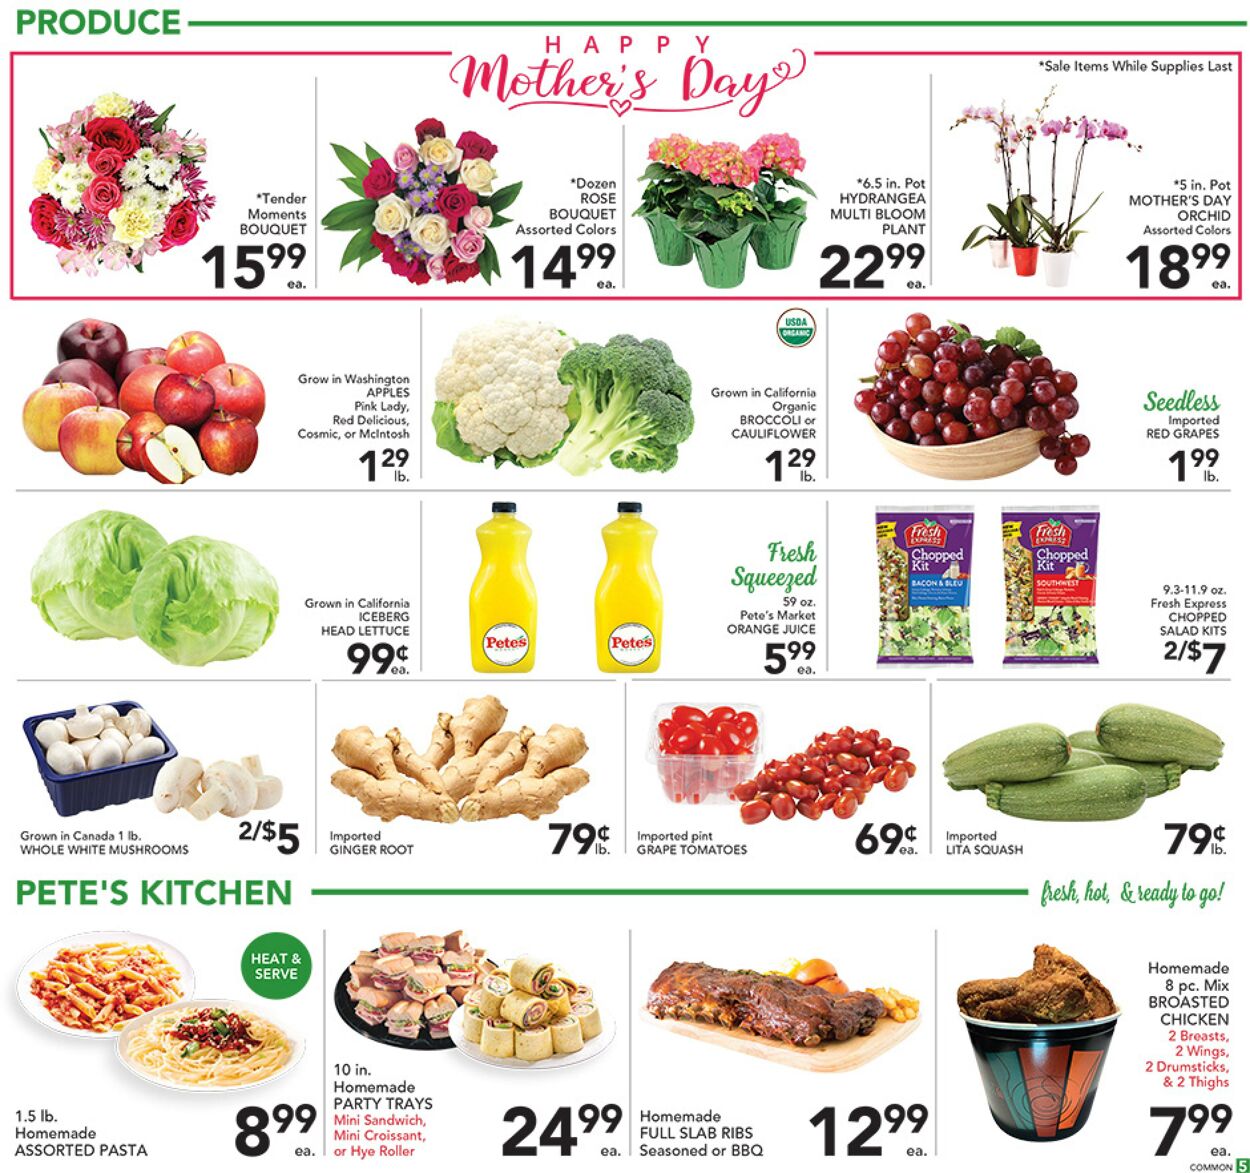 Weekly ad Pete's Fresh Market 05/04/2022 - 05/10/2022